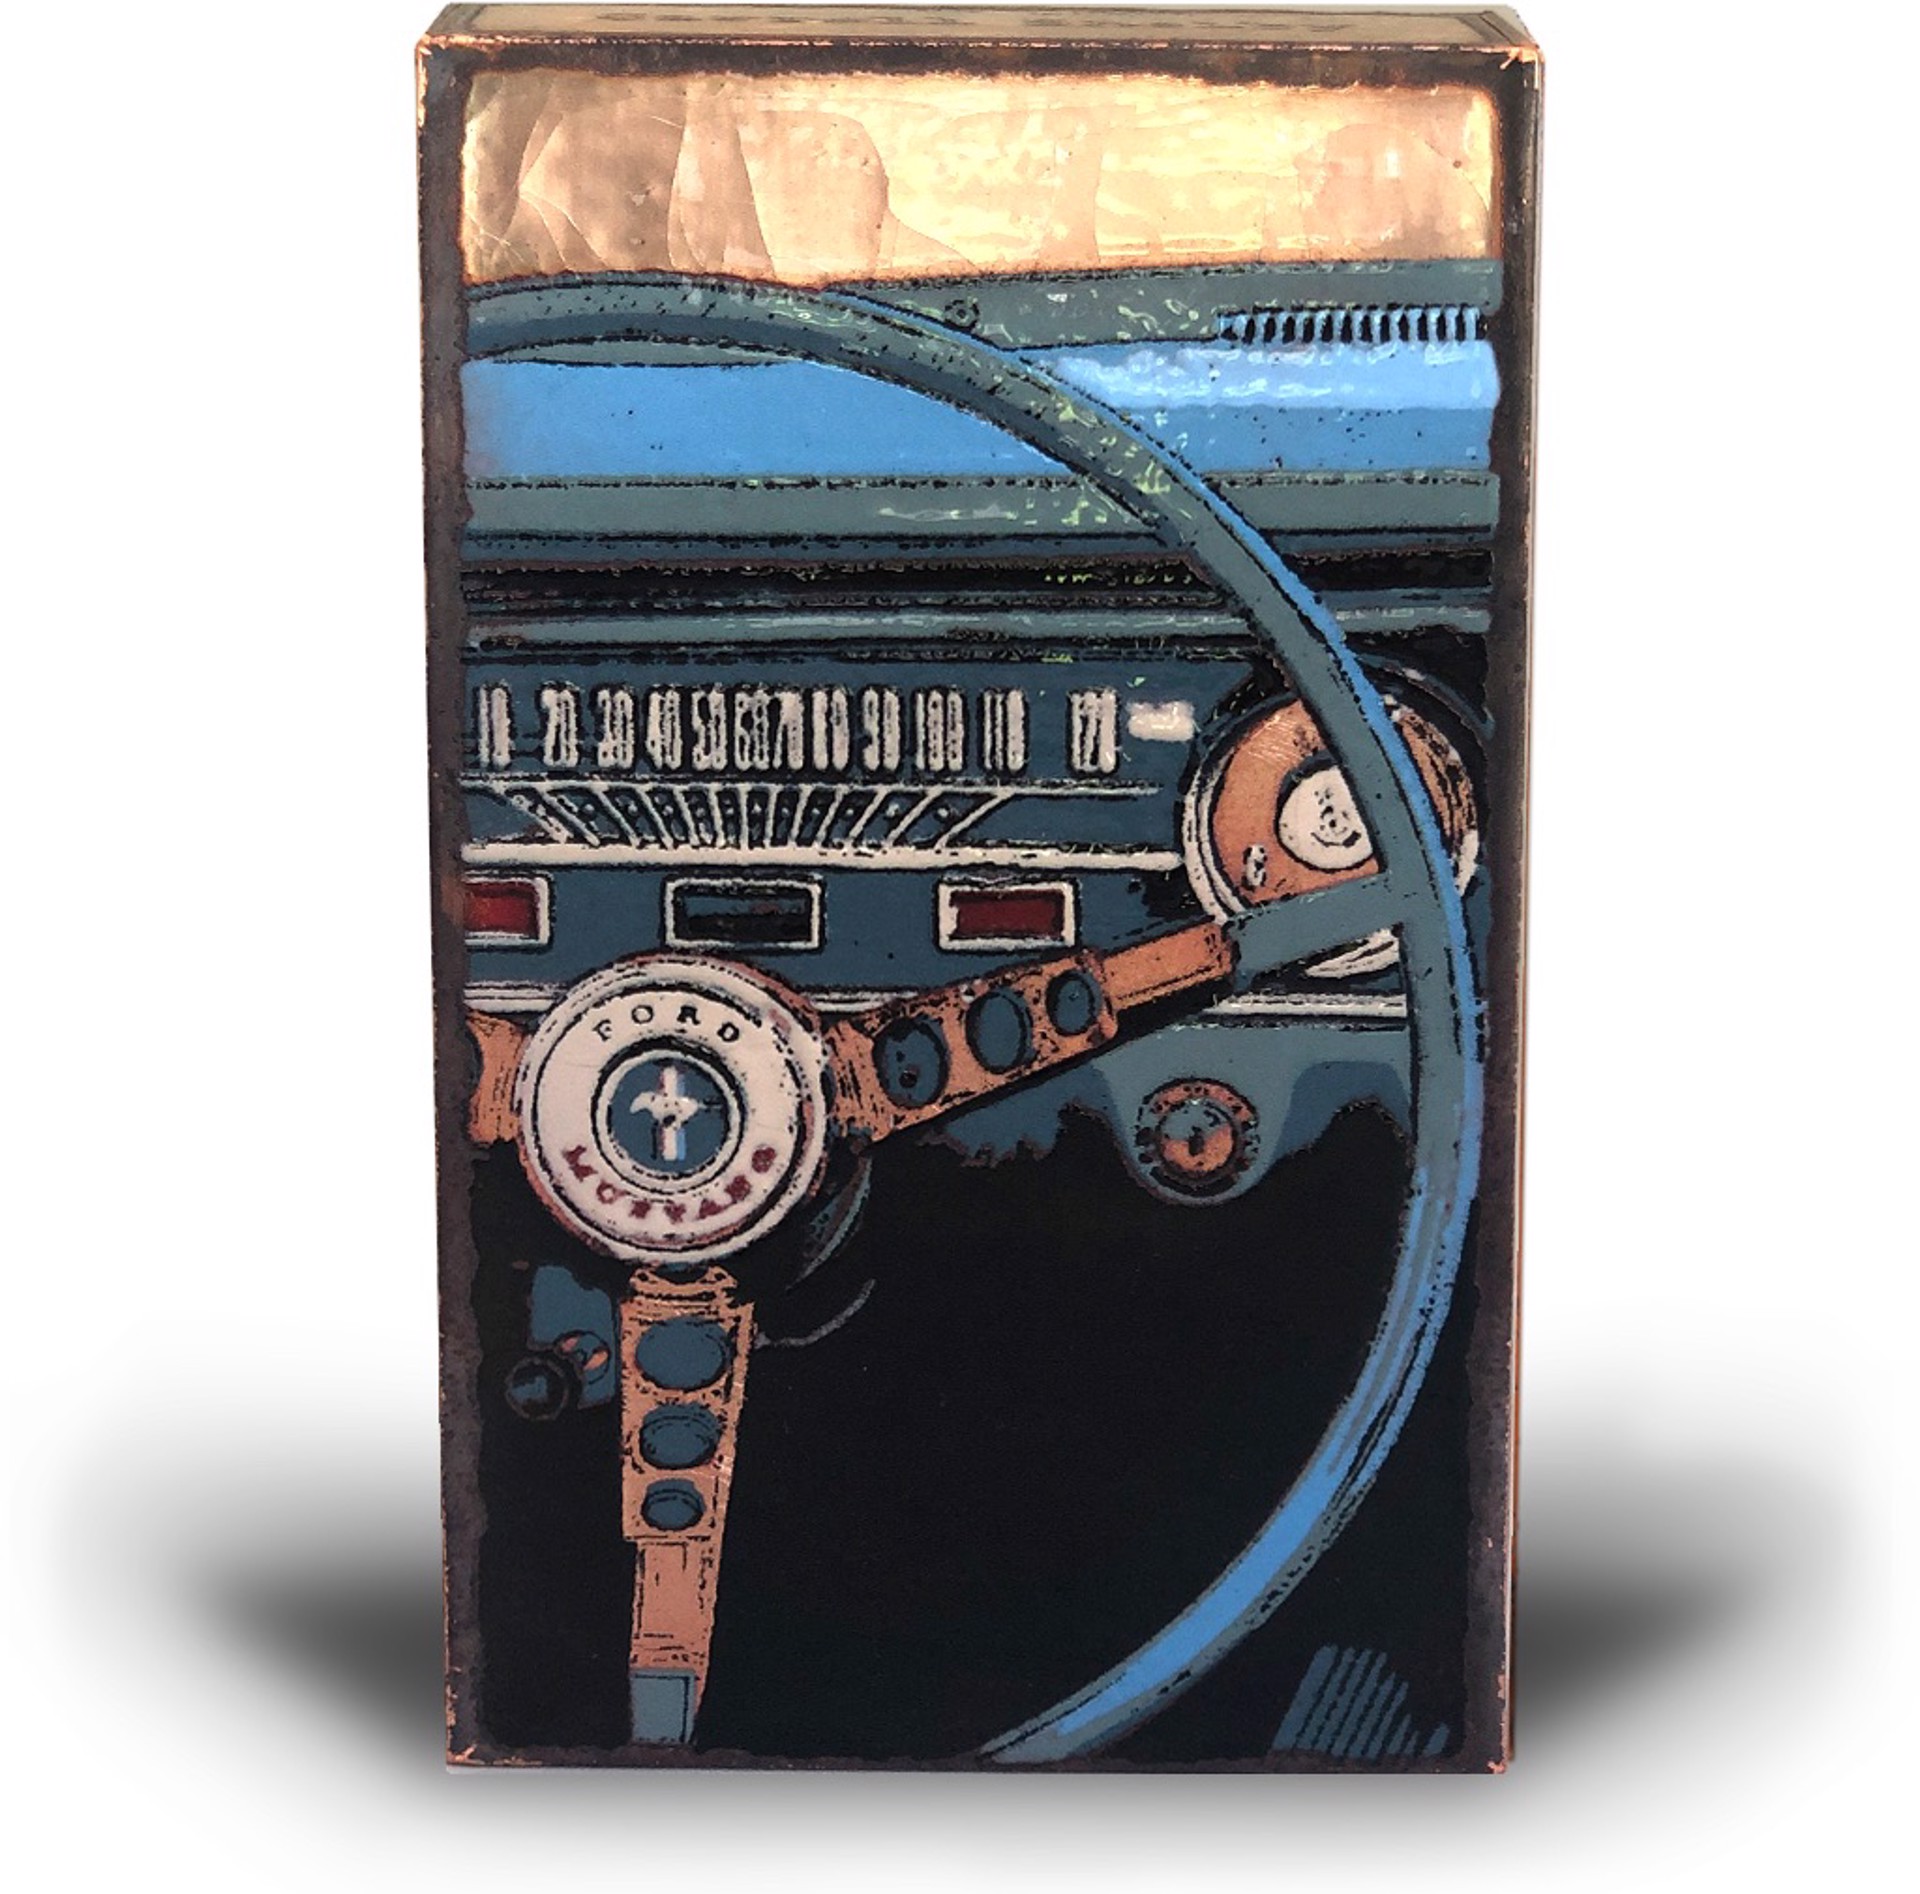 A Handmade Houston Llew Spiritile Featuring A Ford Mustang Steering Wheel In Glass Fired To Cooper, Available At Gallery Wild 